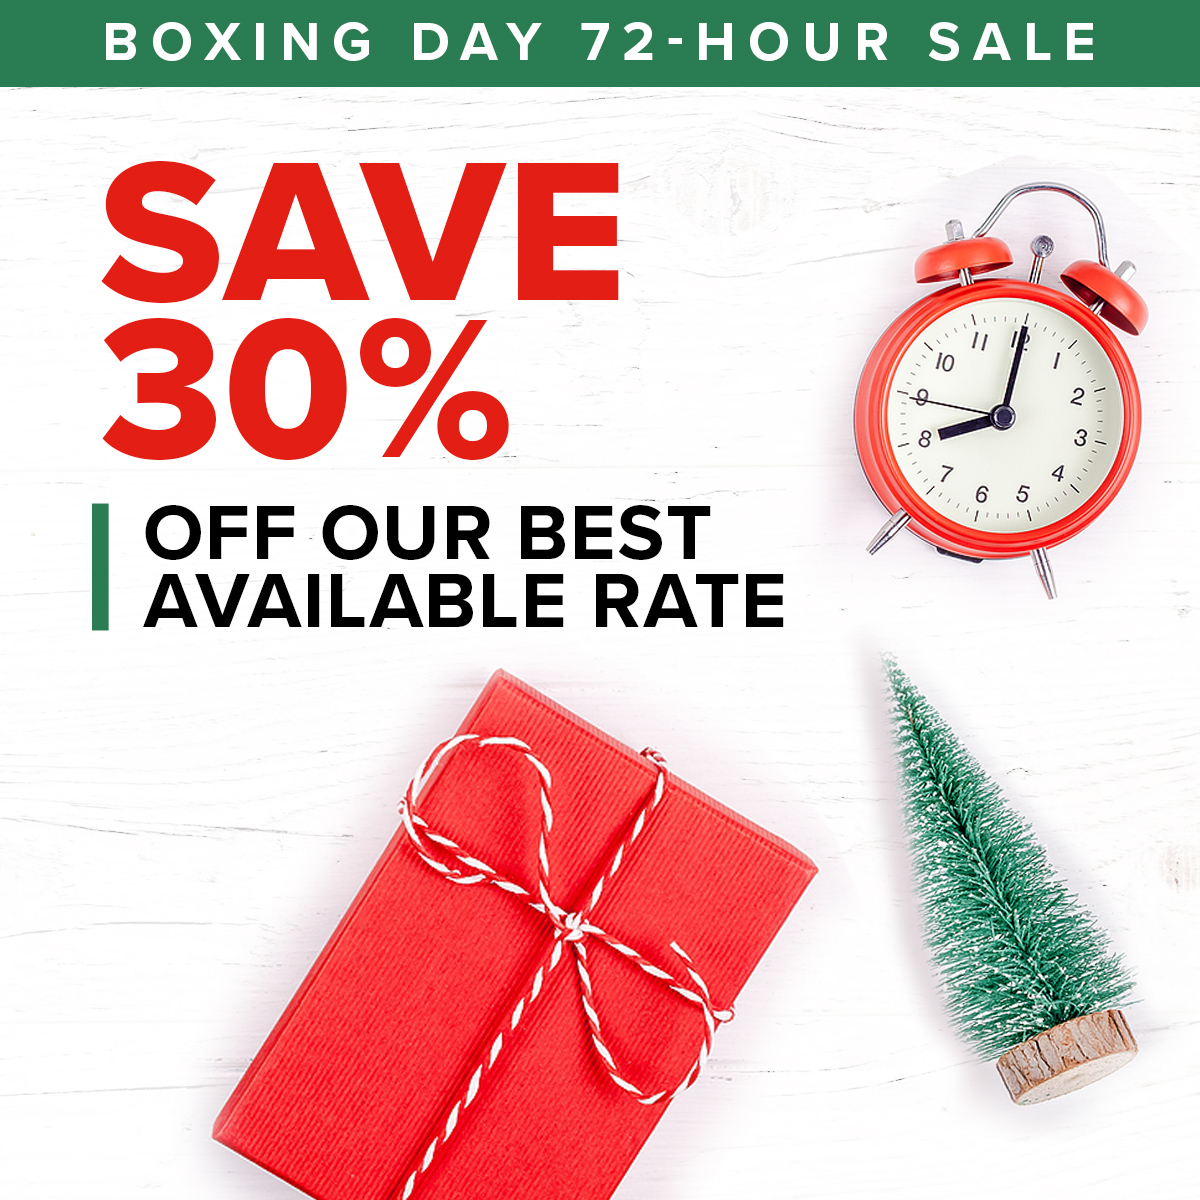 🎁 Unwrap Our Exclusive Boxing Day Guestroom Offer! 🎉 Up to 30% OFF Best Available Rate! BOOK NOW: reservations.travelclick.com/13193?RatePlan… ⏳ 72 Hours Only ⏰ Sale Ends: Friday, December 29th, 1pm #BoxingDayOffer #LimitedTimeDeal #TravelDeals #HotelDiscounts #LuxuryGetaway #BookNow